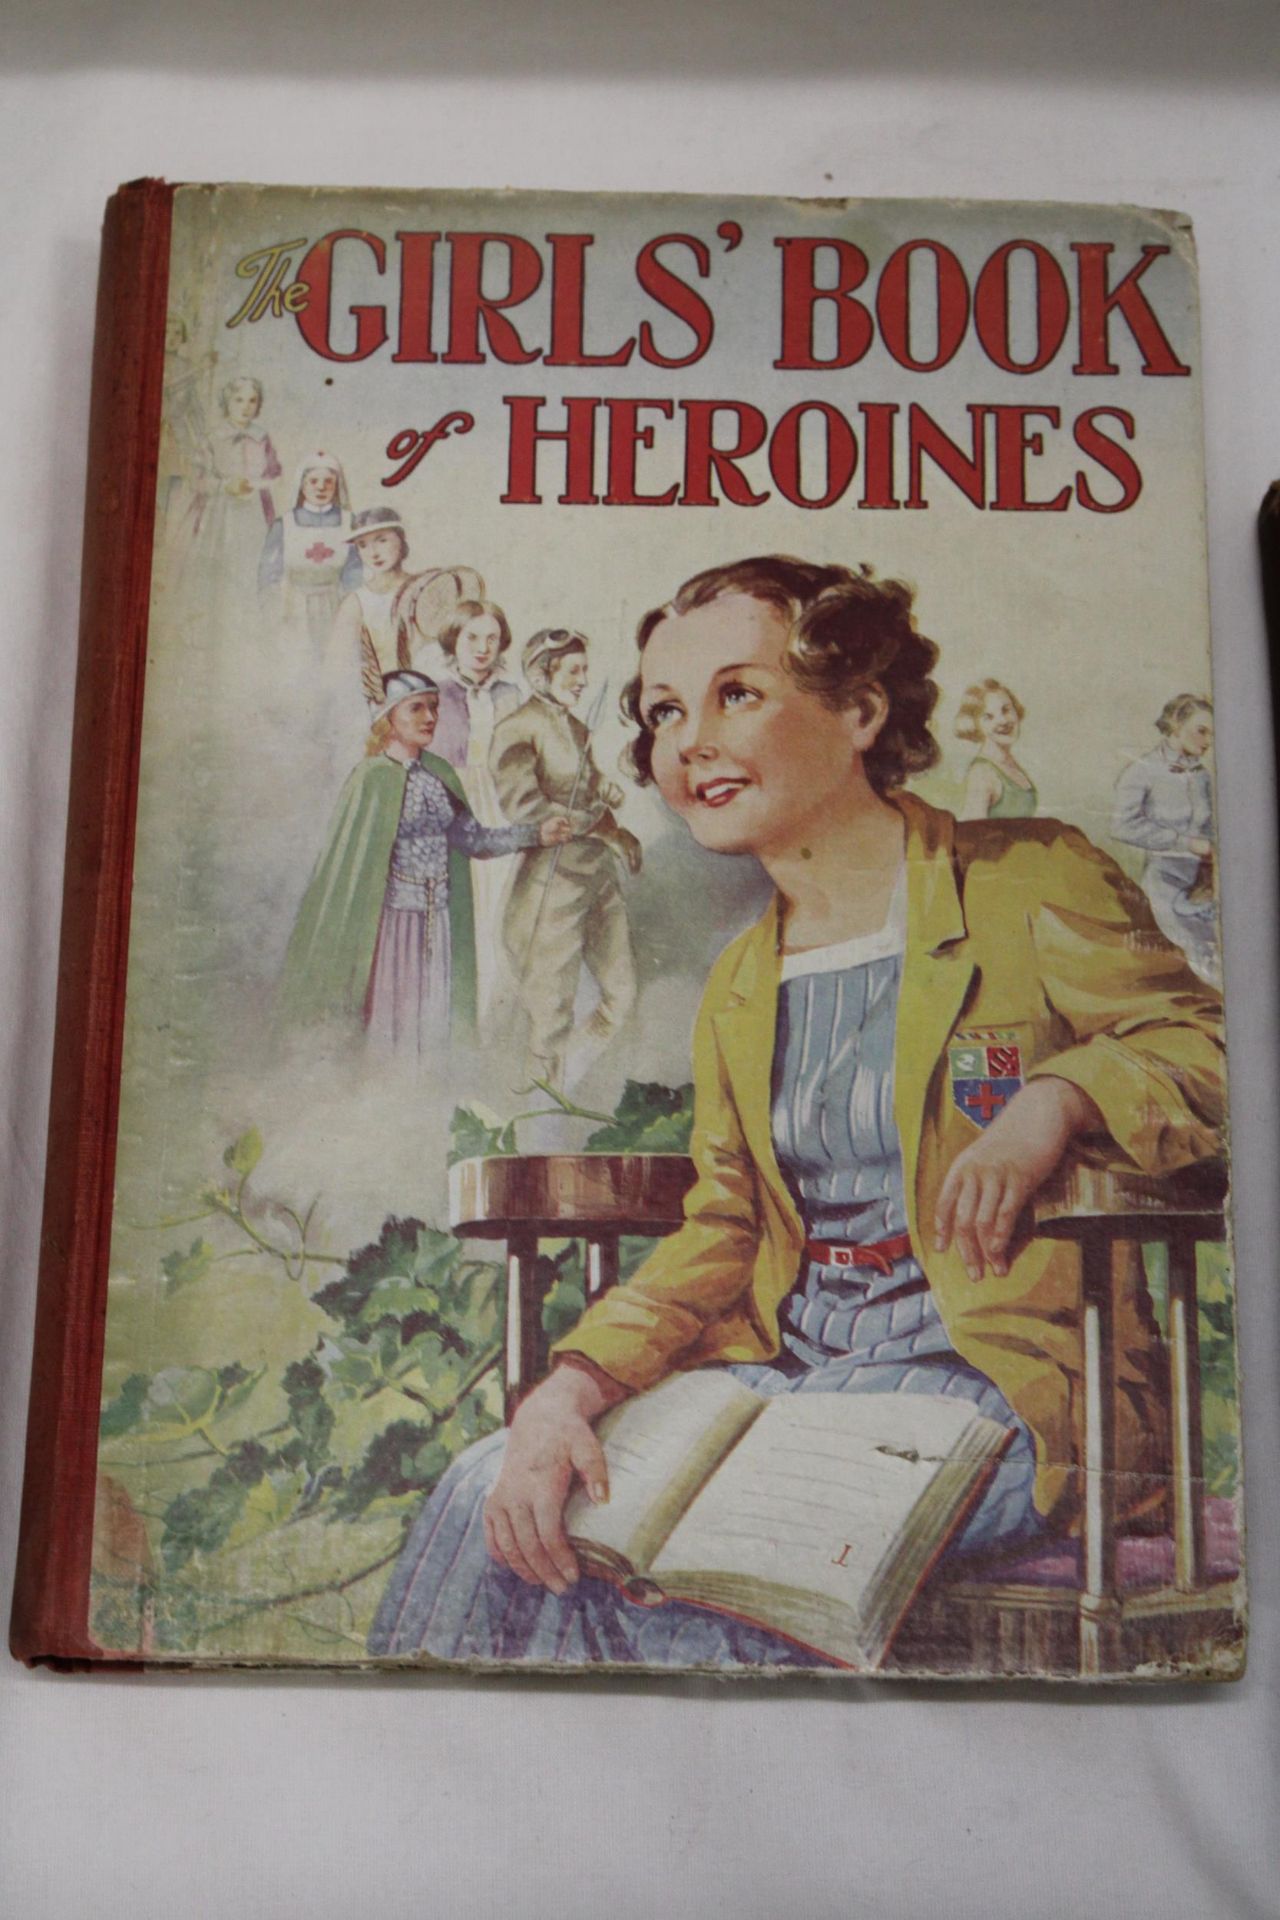 TWO VINTAGE HARDBACK CHILDREN'S BOOKS, 'THE GIRL'S BOOK OF HEROINES' AND 'LAMB'S TALES FROM - Image 3 of 8